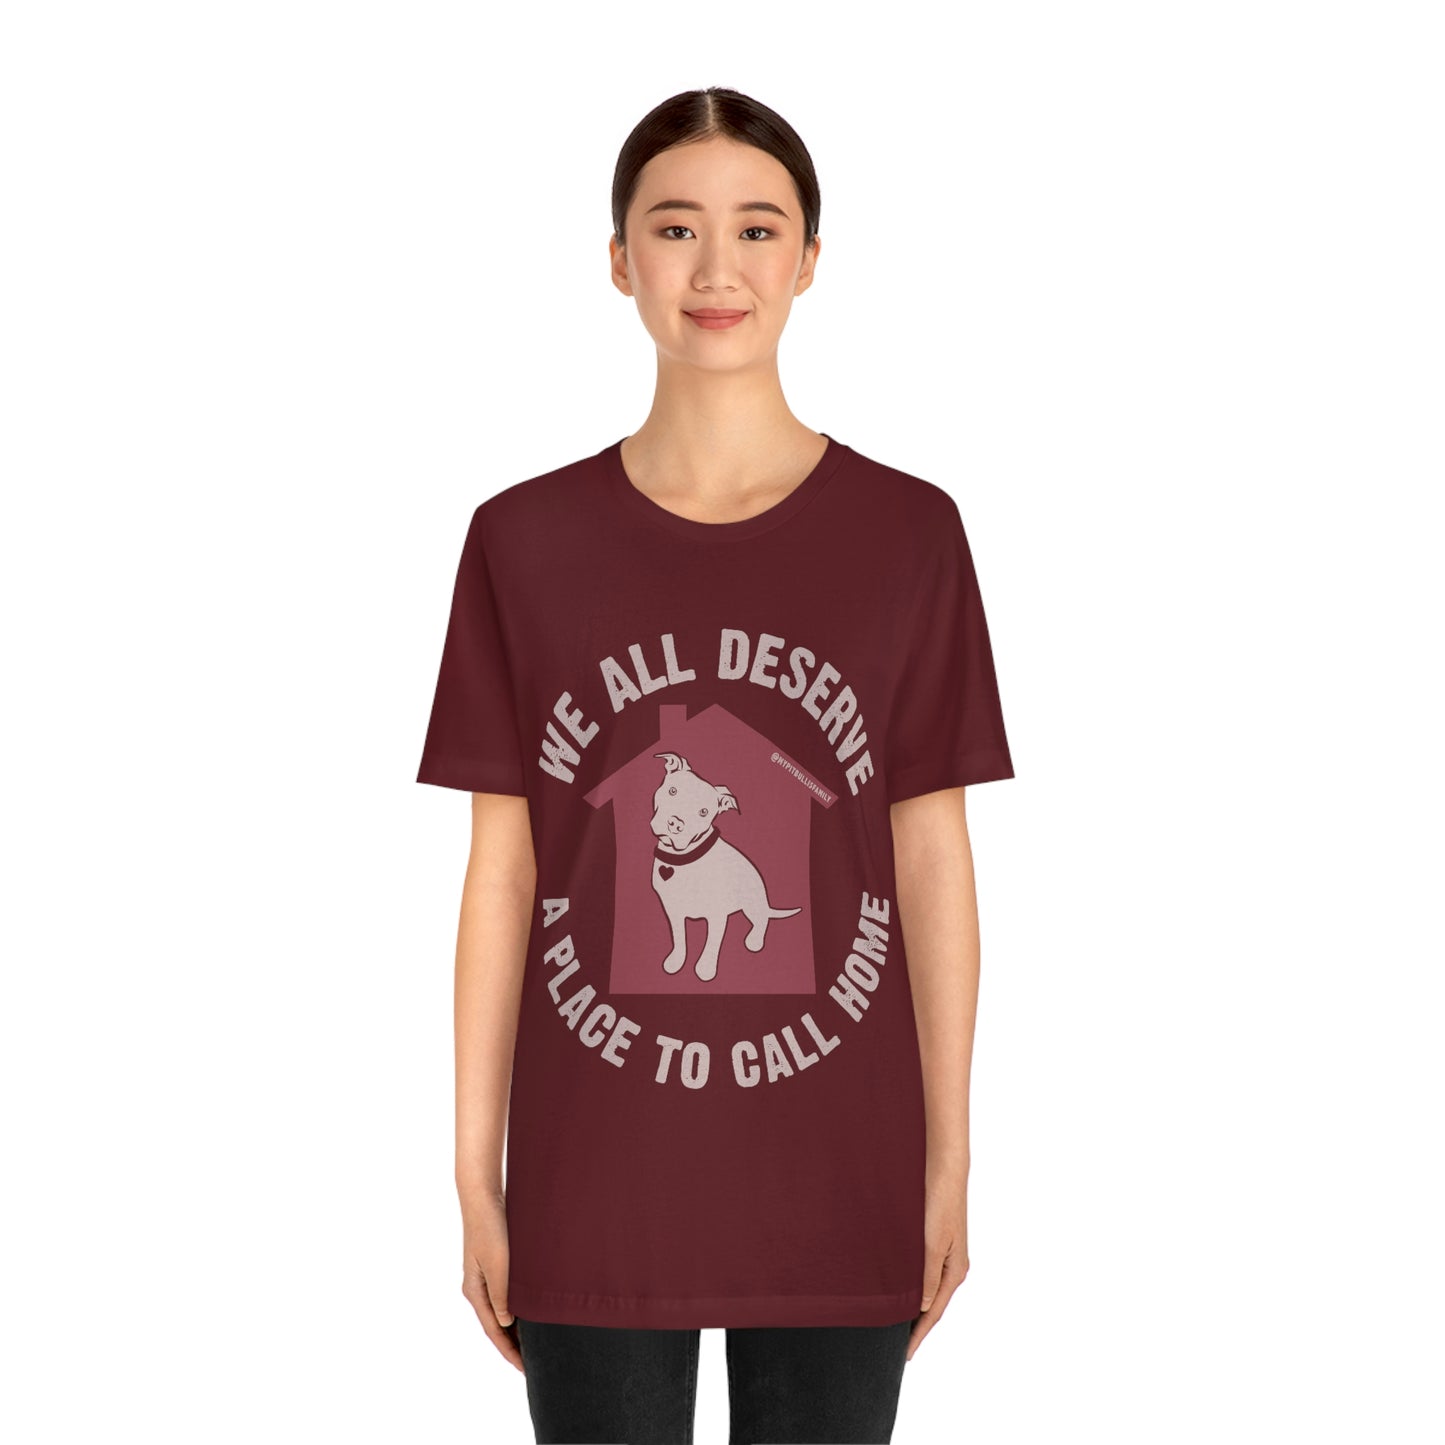 We All Deserve a Place to Call Home Unisex Jersey Short Sleeve Tee